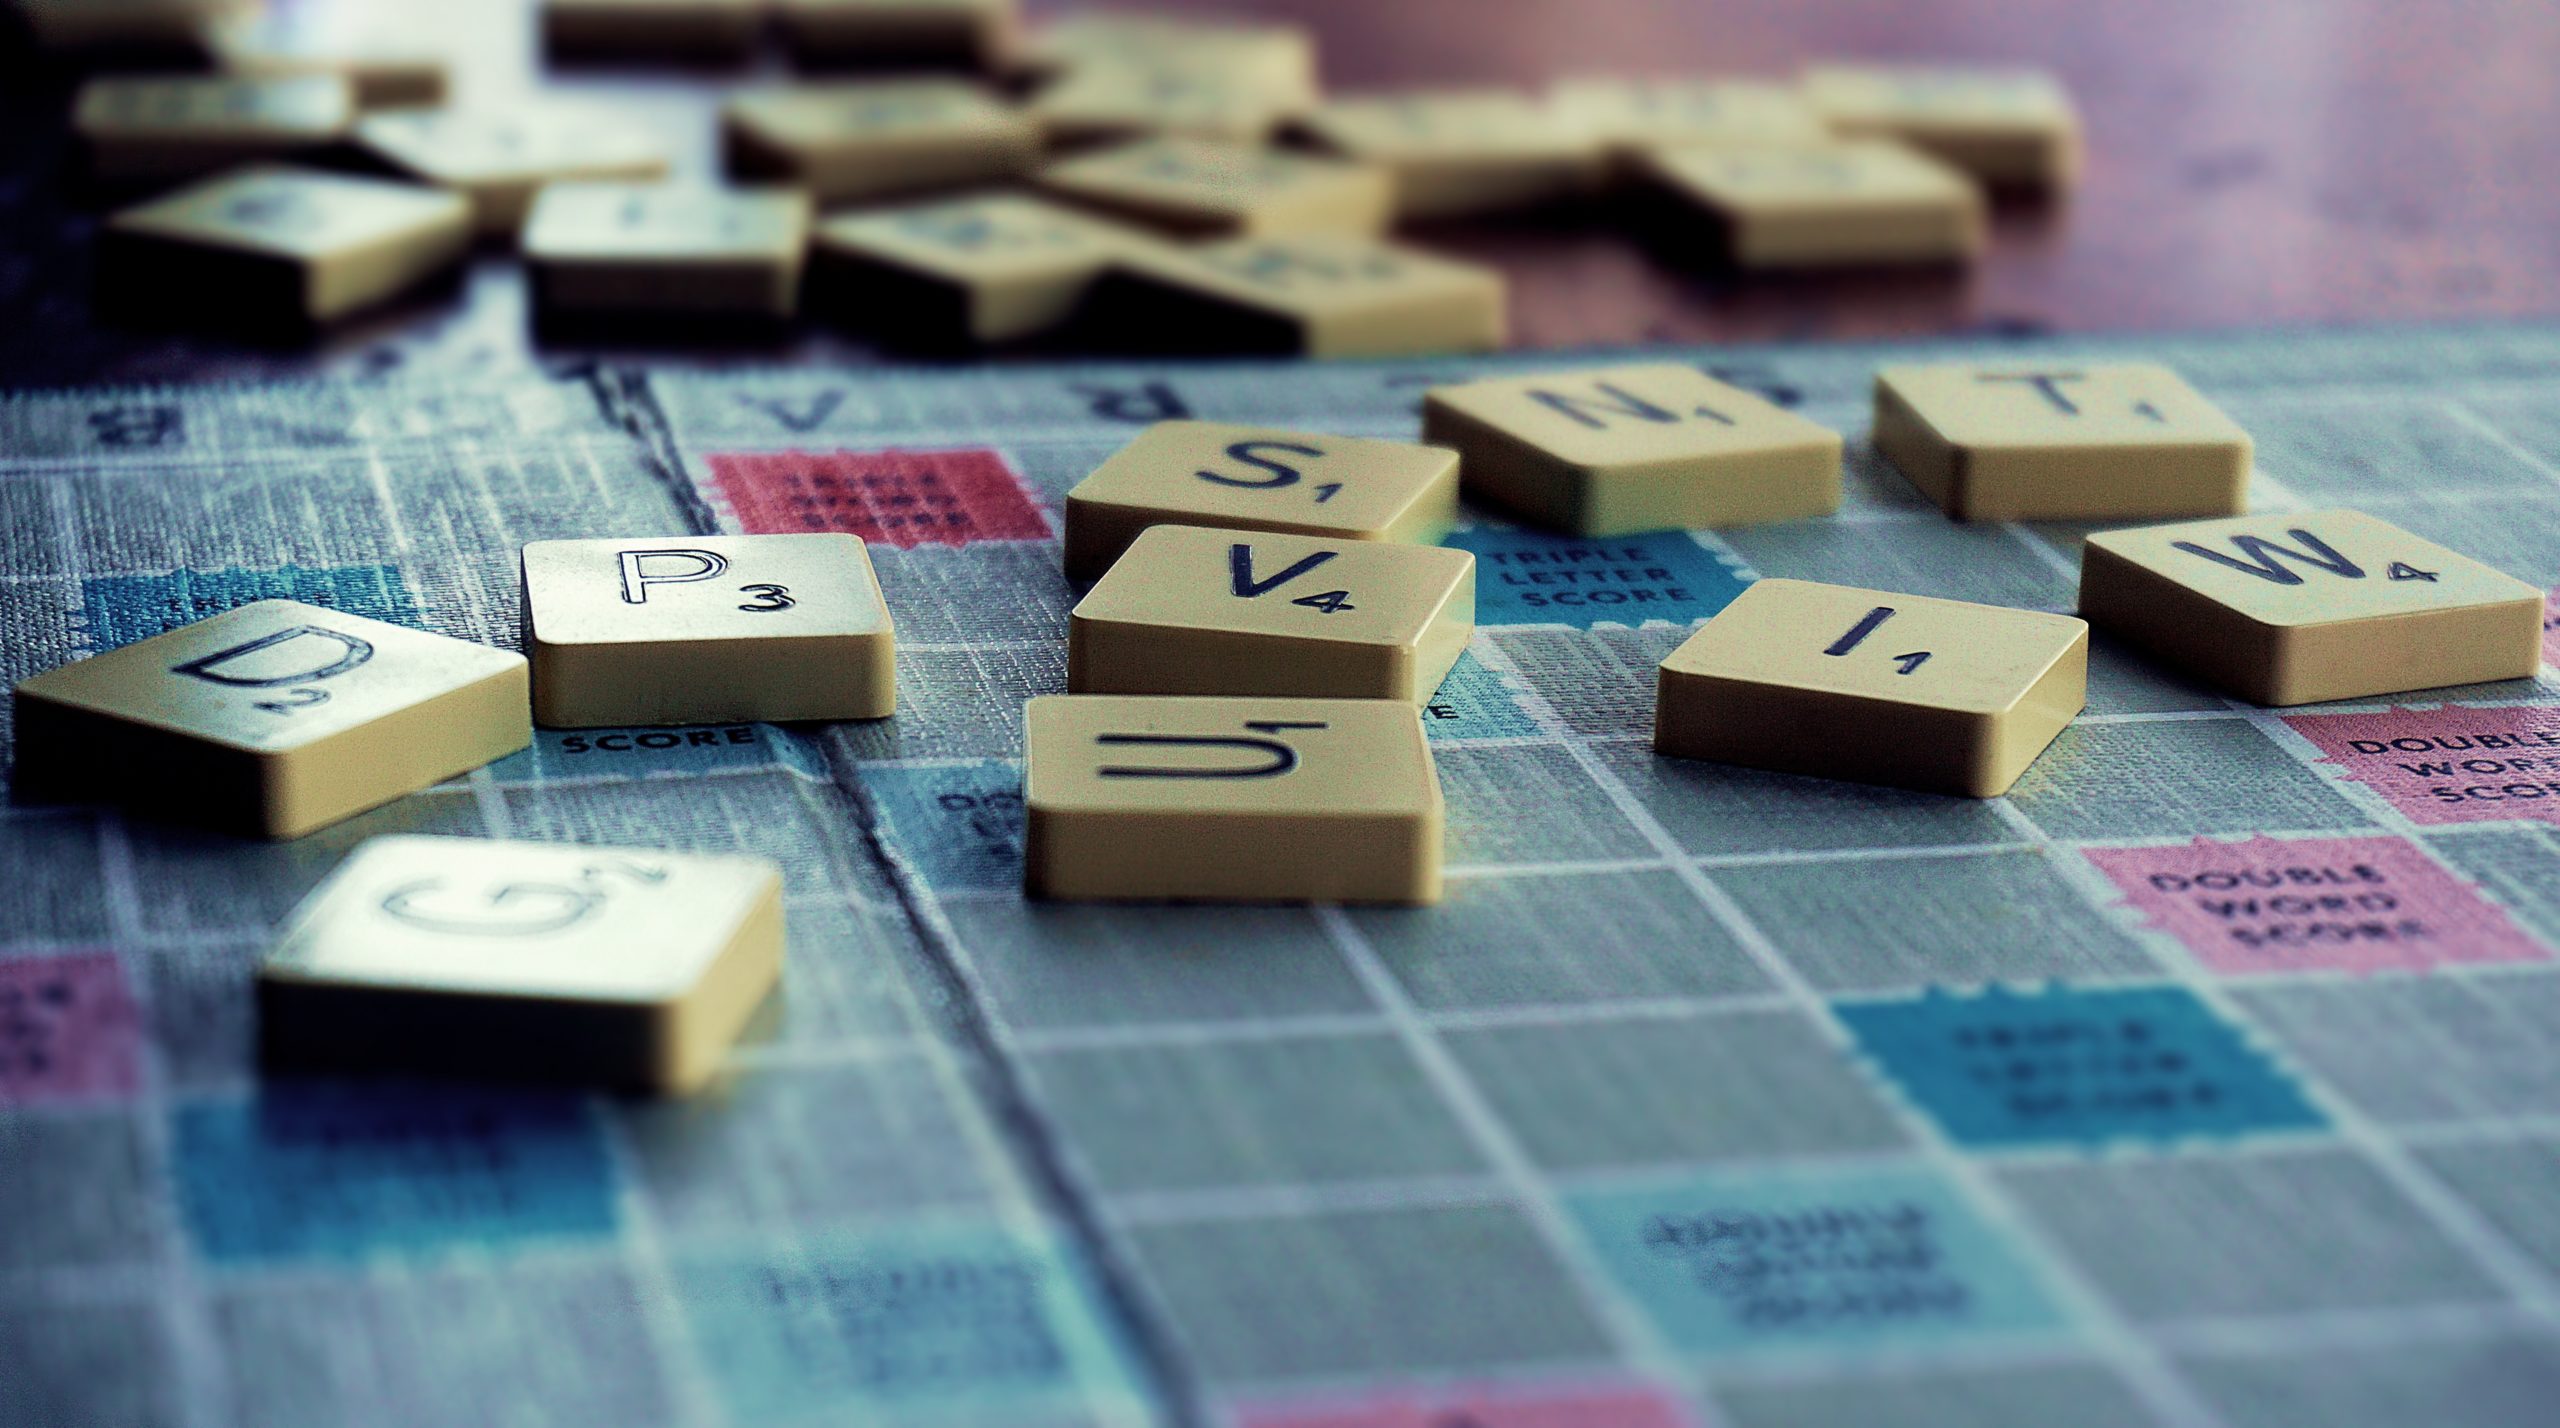 scrabble pieces on a board